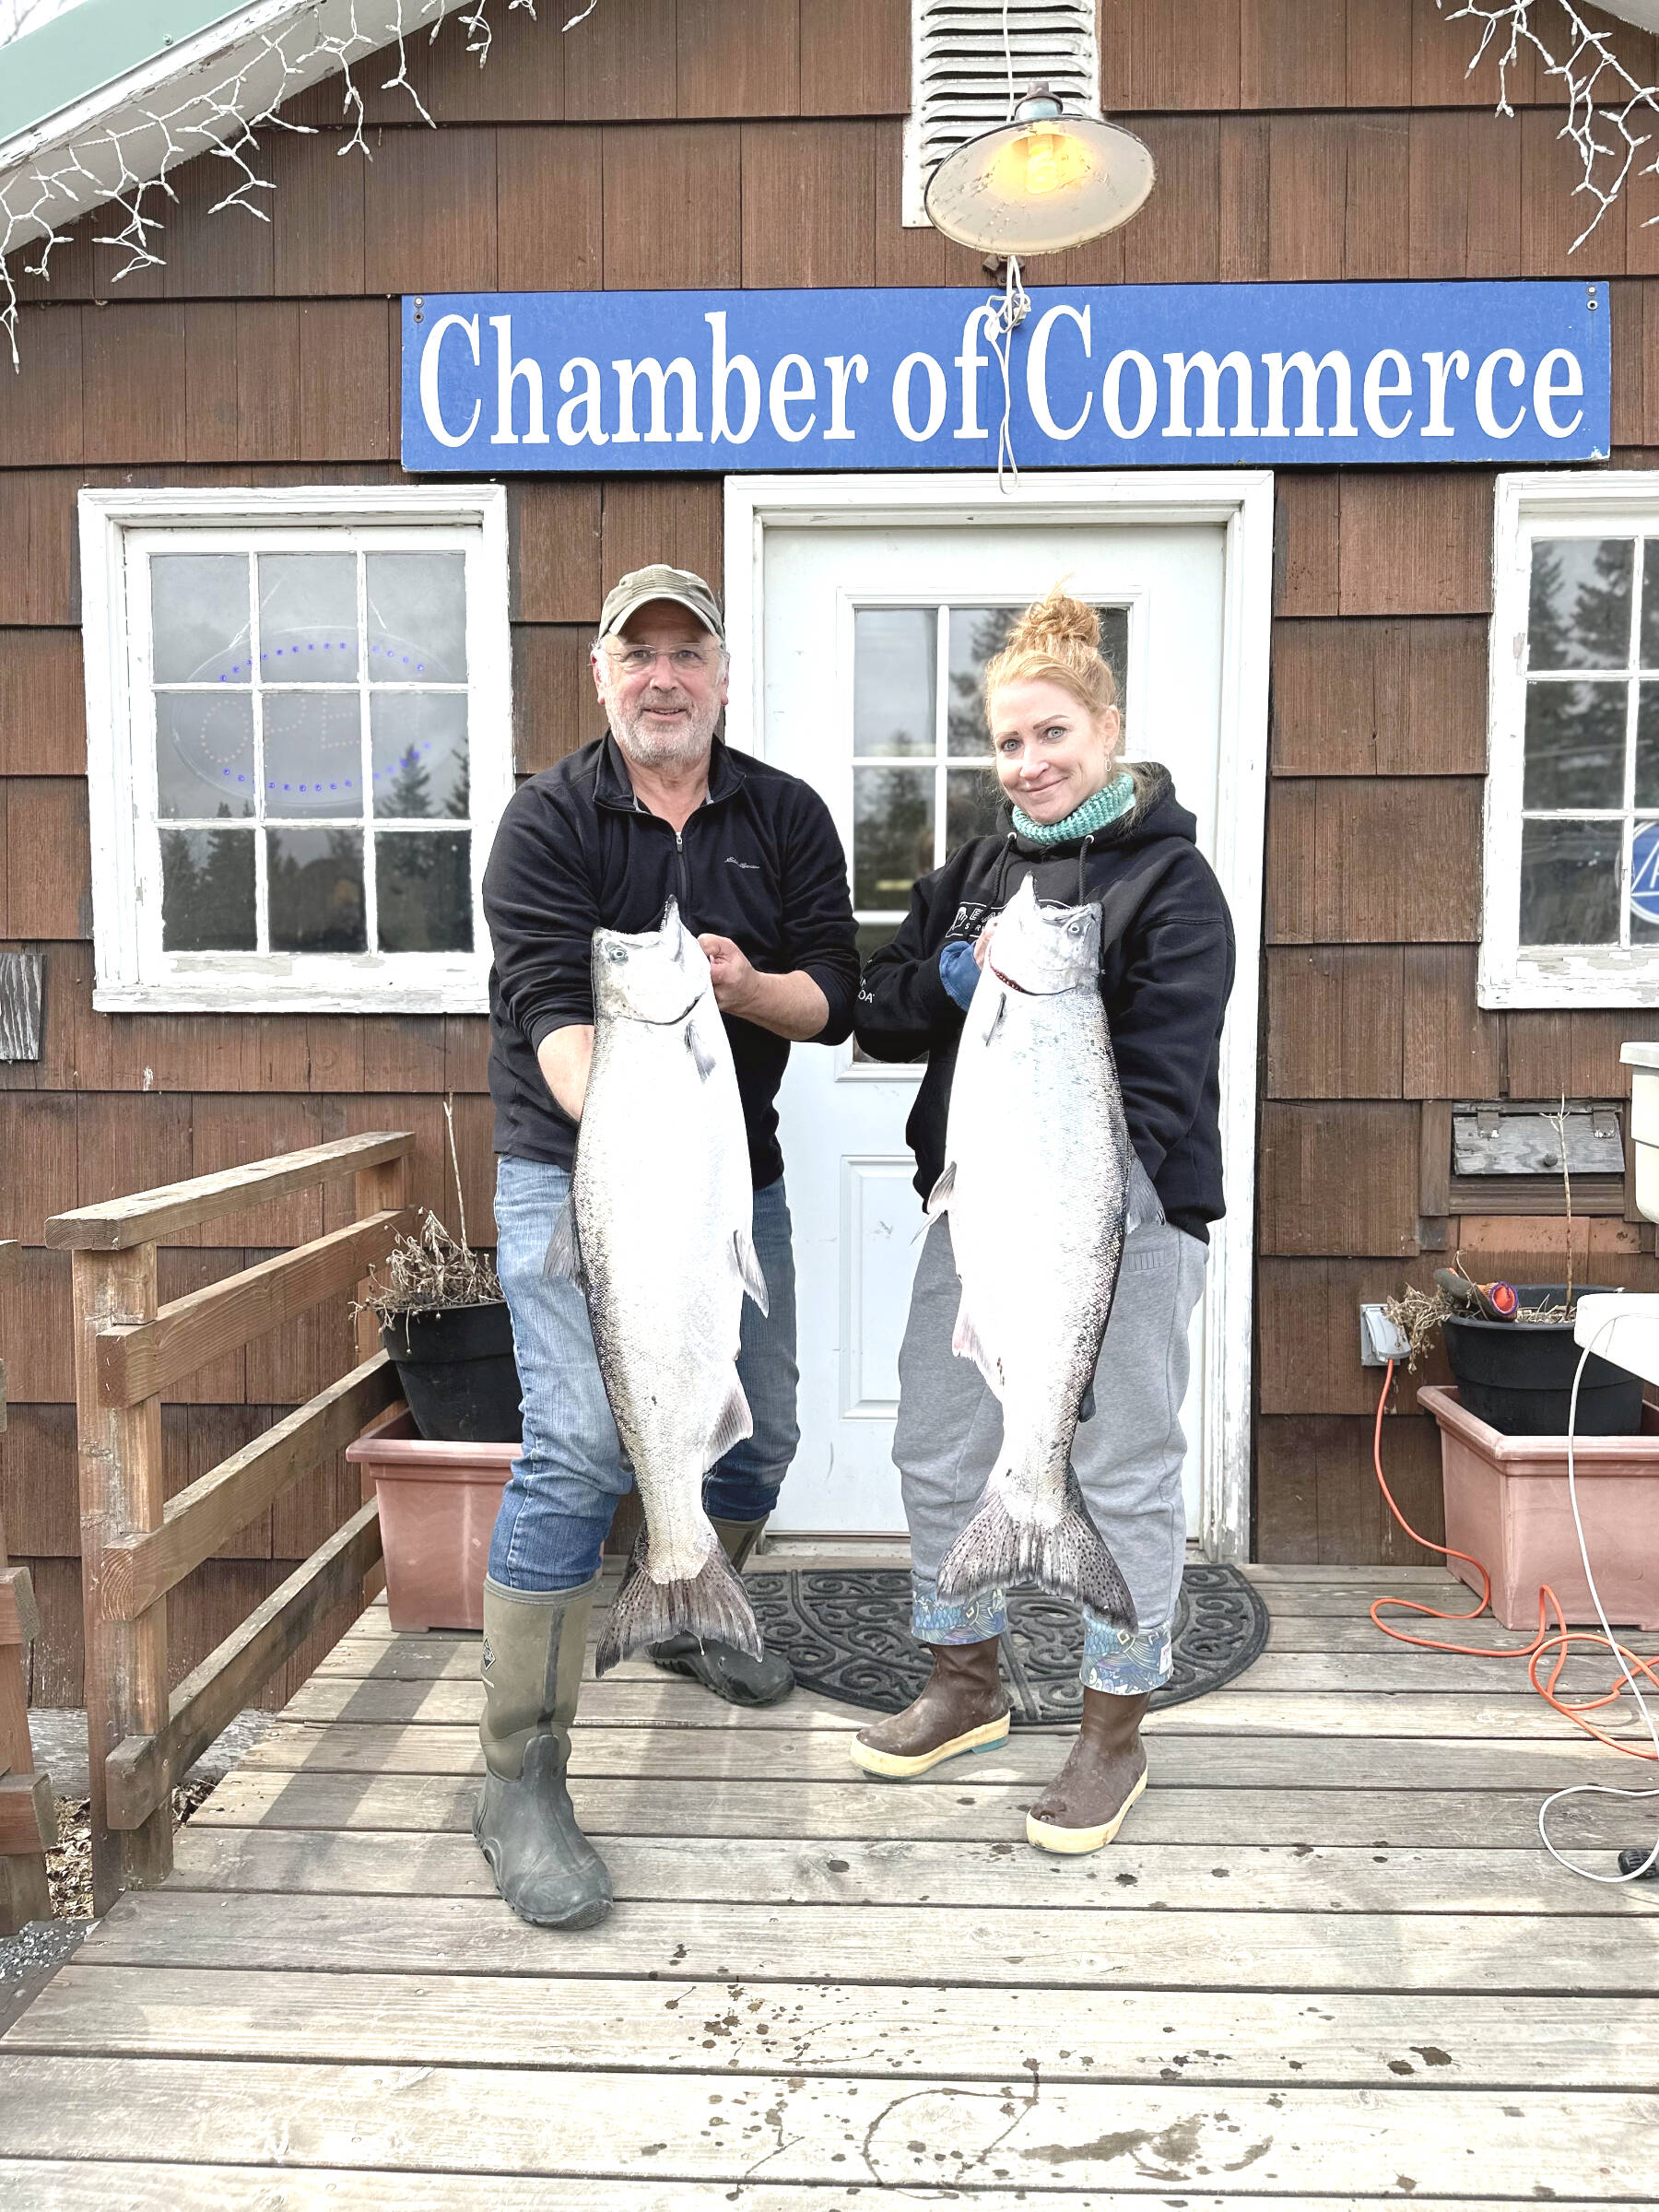 The 28th annual Anchor Point King Salmon Tournament first and second place winners, Judy Persnail (right) and Mark Tornai (left) from the boat Outlaw hold up their fish during weigh-in on Saturday, May 6 at the Anchor Point Chamber of Commerce building in Anchor Point, Alaska. Photo courtesy of Mcki Needham